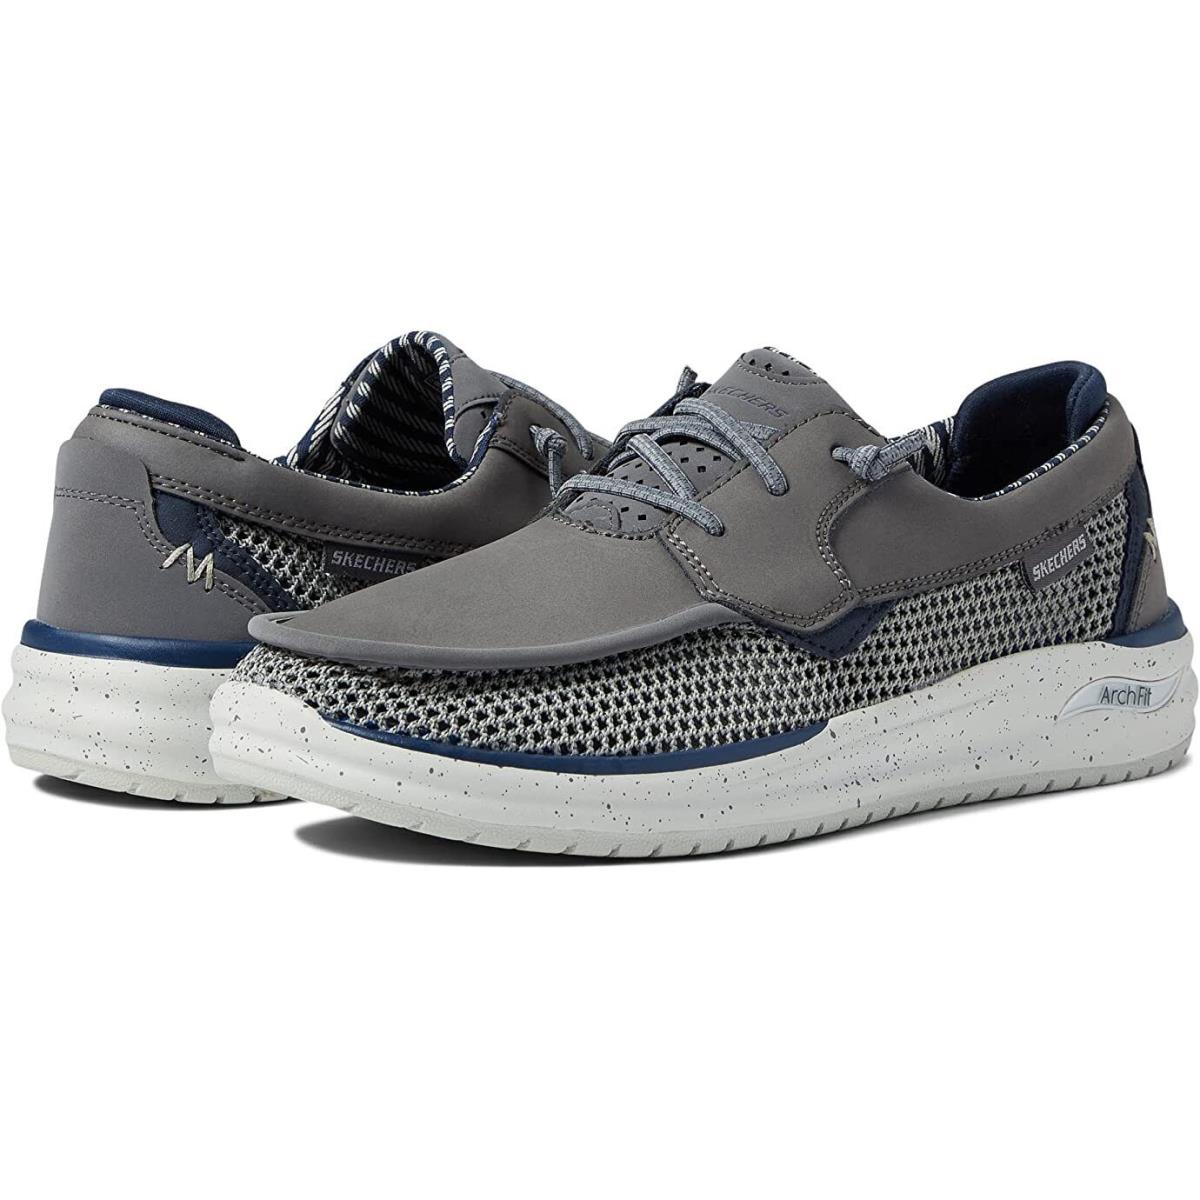 Men`s Skechers Arch Fit Melo Waymer Arch Boat 204589 /char Multi Sizes Charcoal